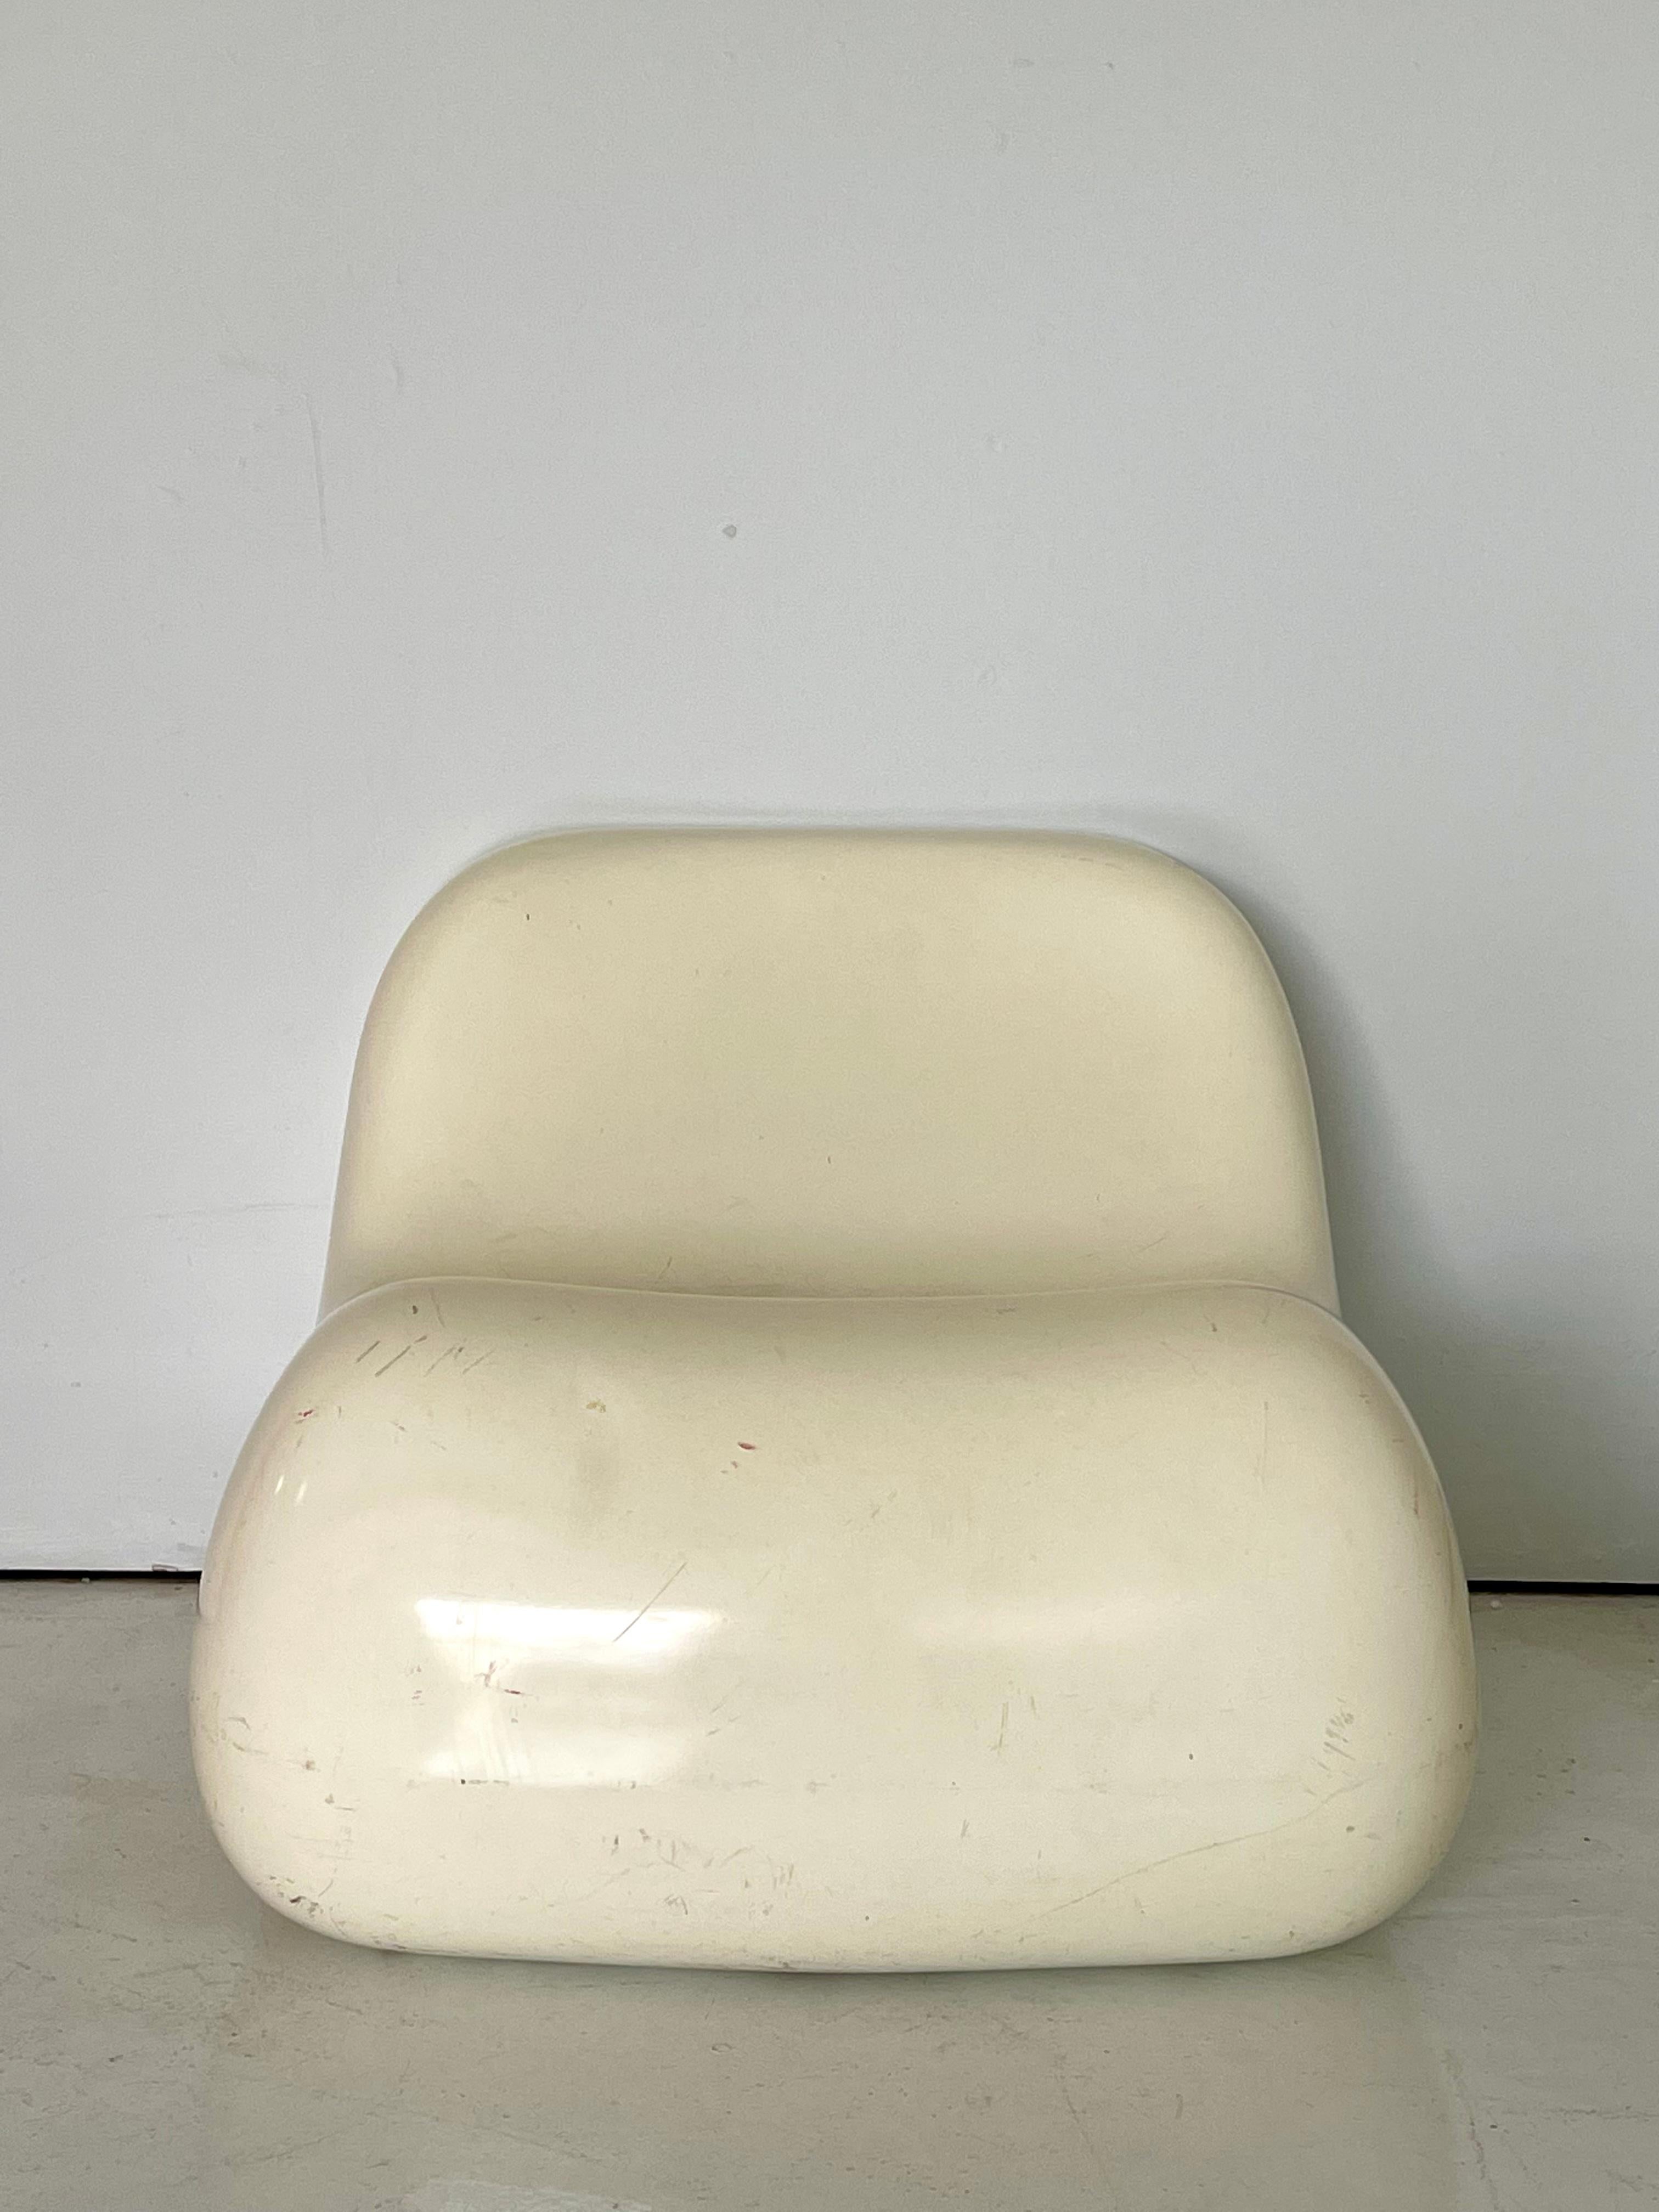 Jumbo chair in white fiberglass by Alberto Rosselli for Saporiti, 1968. Beautiful space age design showcasing Rosselli’s interest in new technologies and materials. Produced with a flat backside to be placed against a wall or with another jumbo